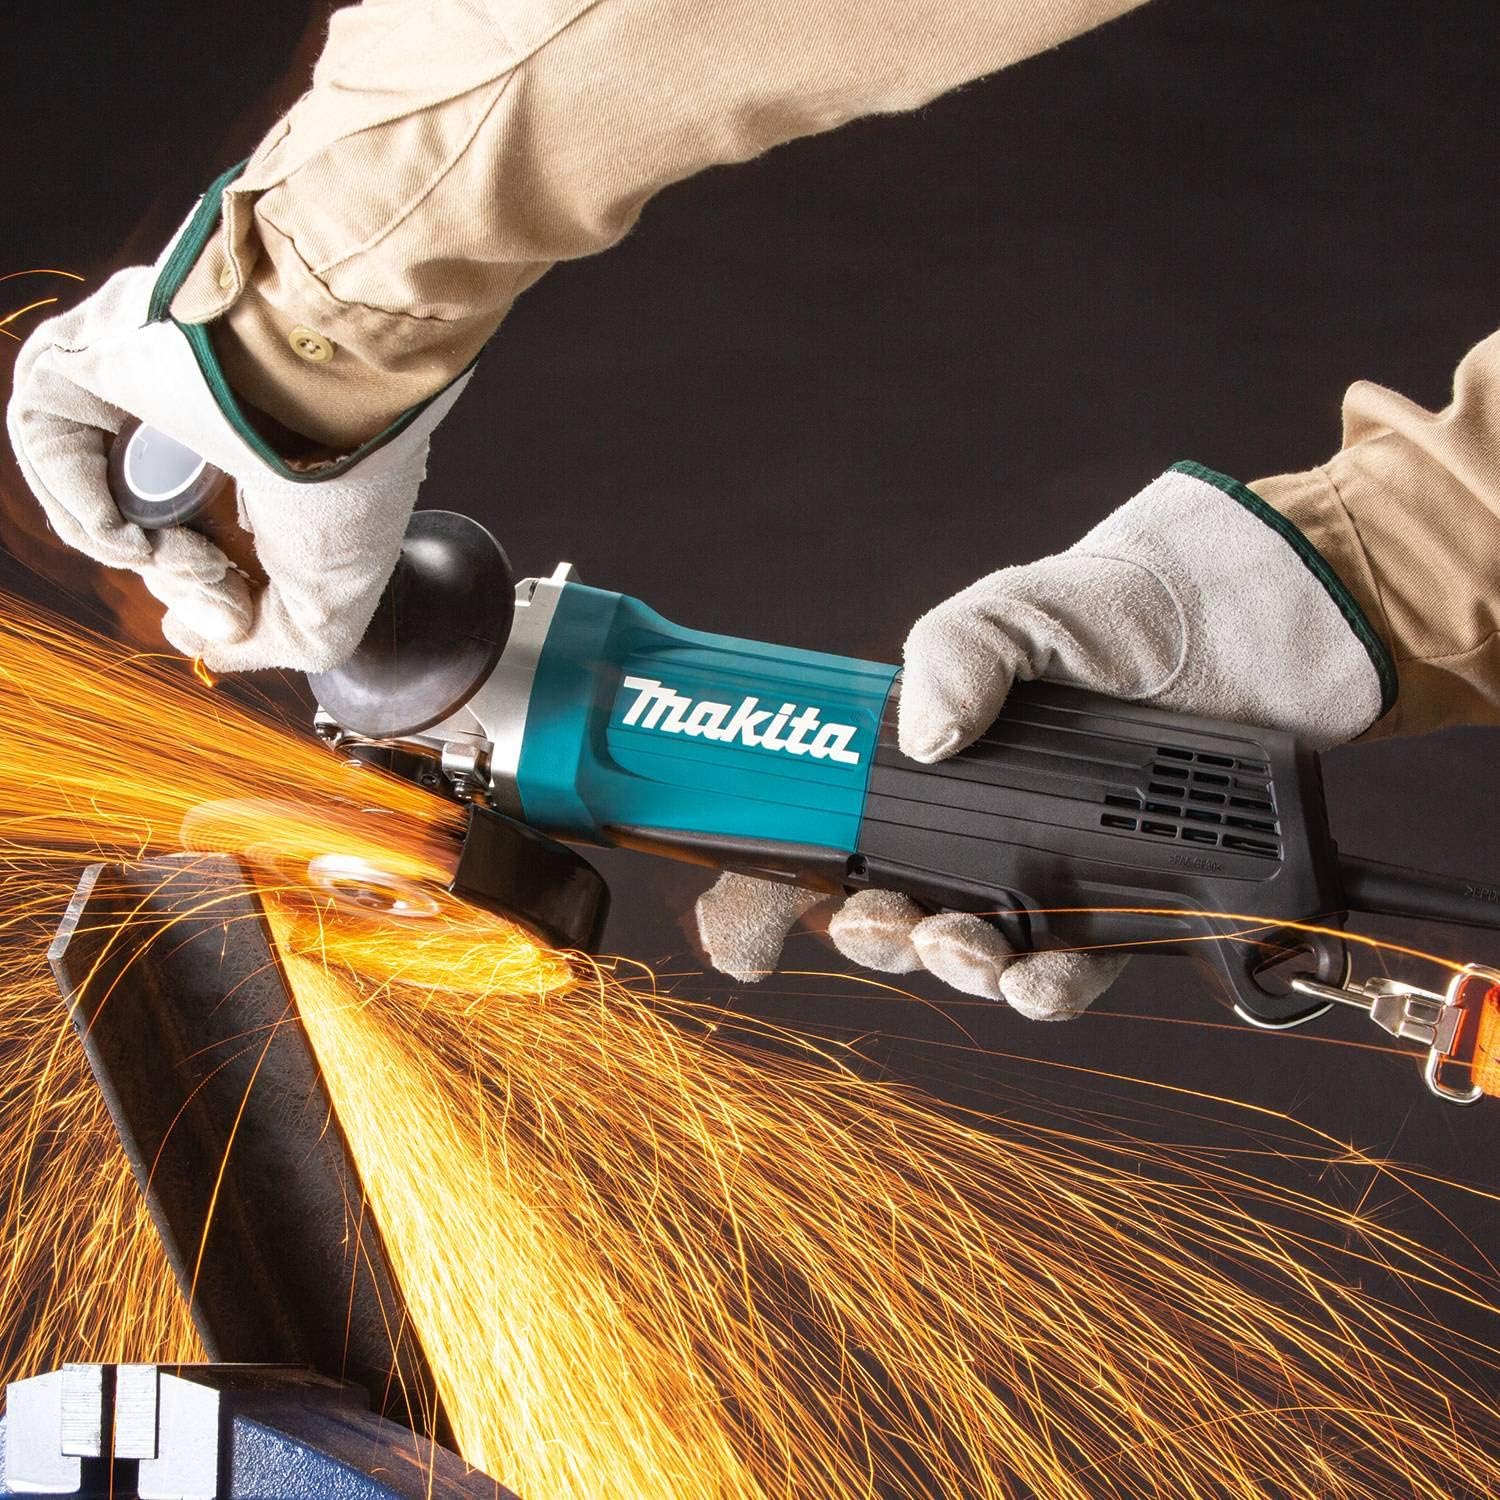 Makita GA5053R 4-1/2 / 5 Paddle Switch Angle Grinder, with Non-Removable Guard